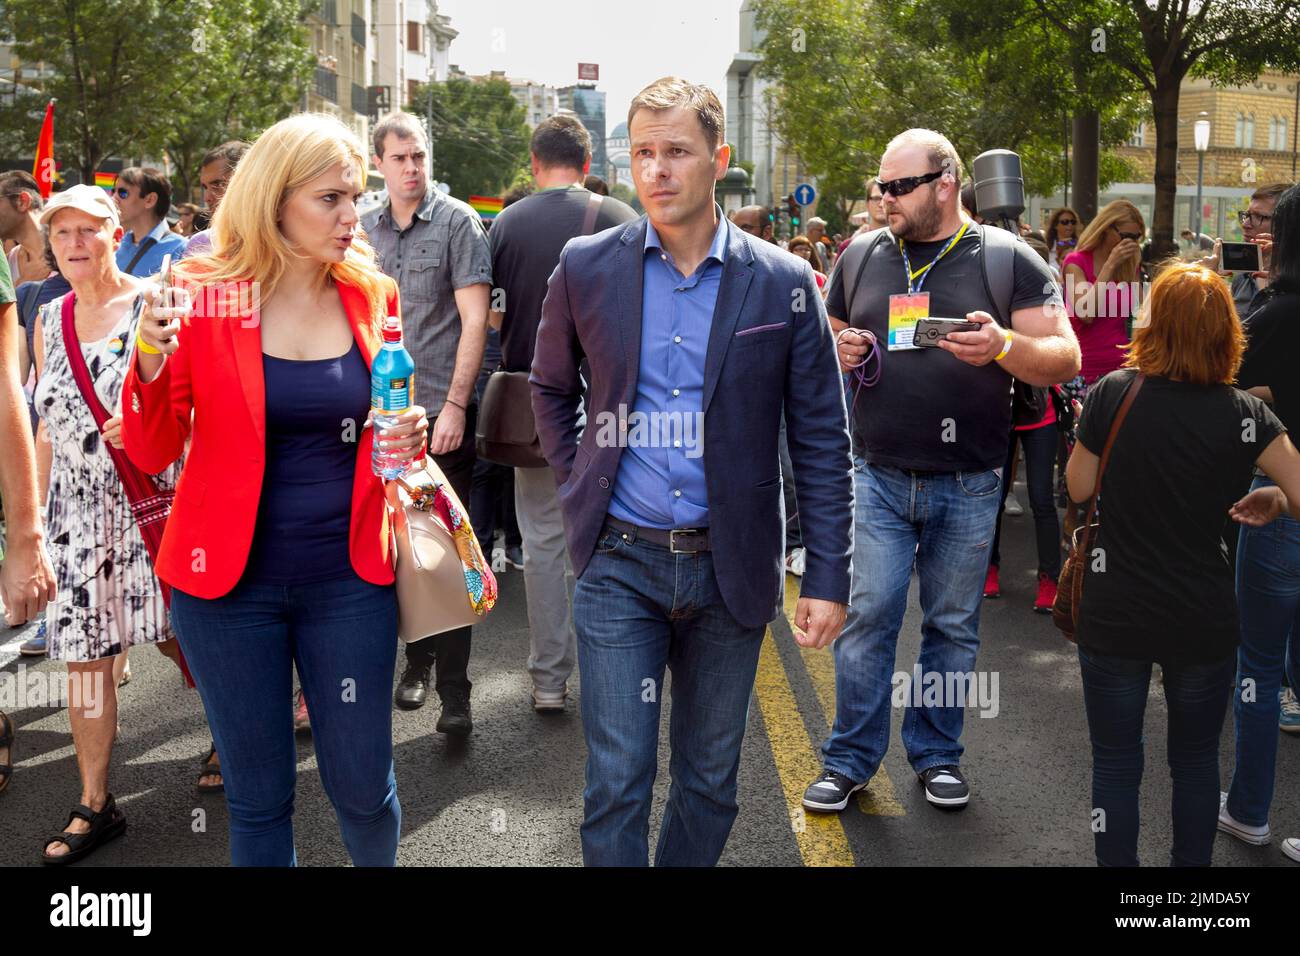 Picture of Sinisa Mali (right) former Belgrade Mayor and current Minster of Finances of Serbia, during Belgrade 2016 Gay Pride. Siniša Mali is a Serbi Stock Photo